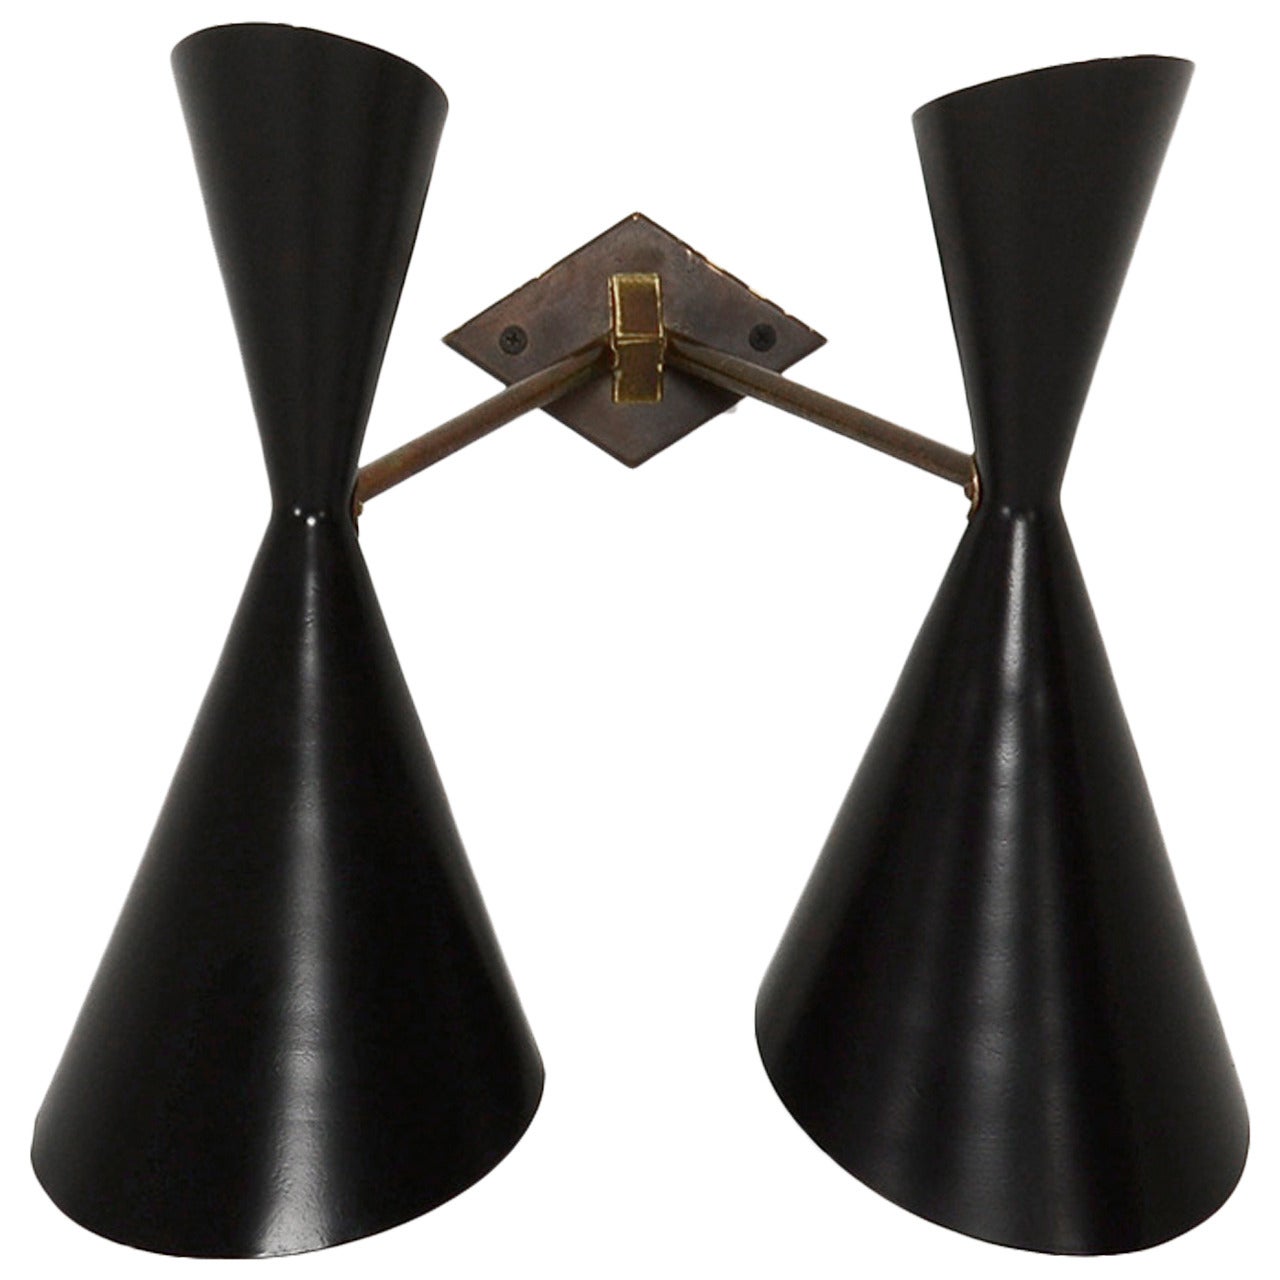 Italian Double Sconce Wall Sconce